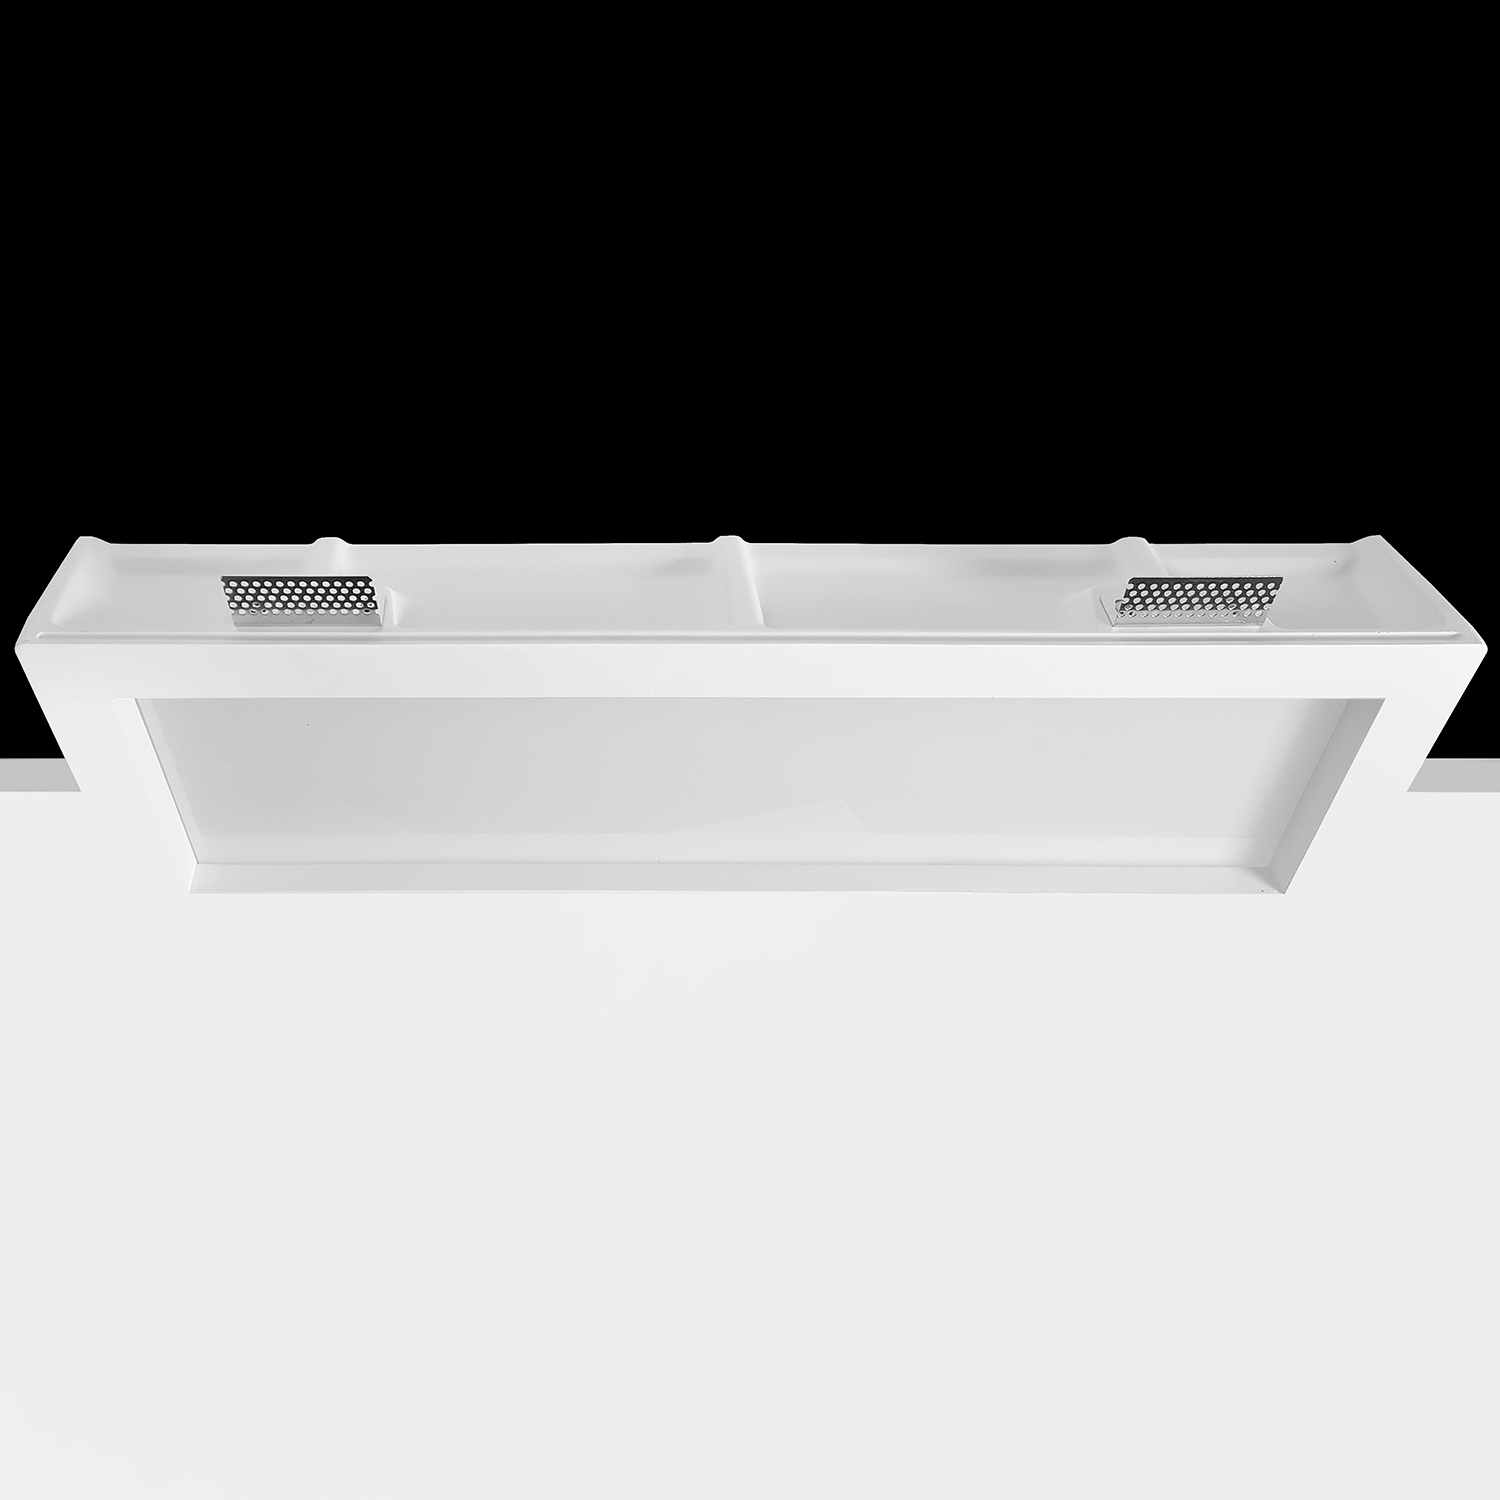 Empotrable yeso horizontal LED 660mm IN952 difusor